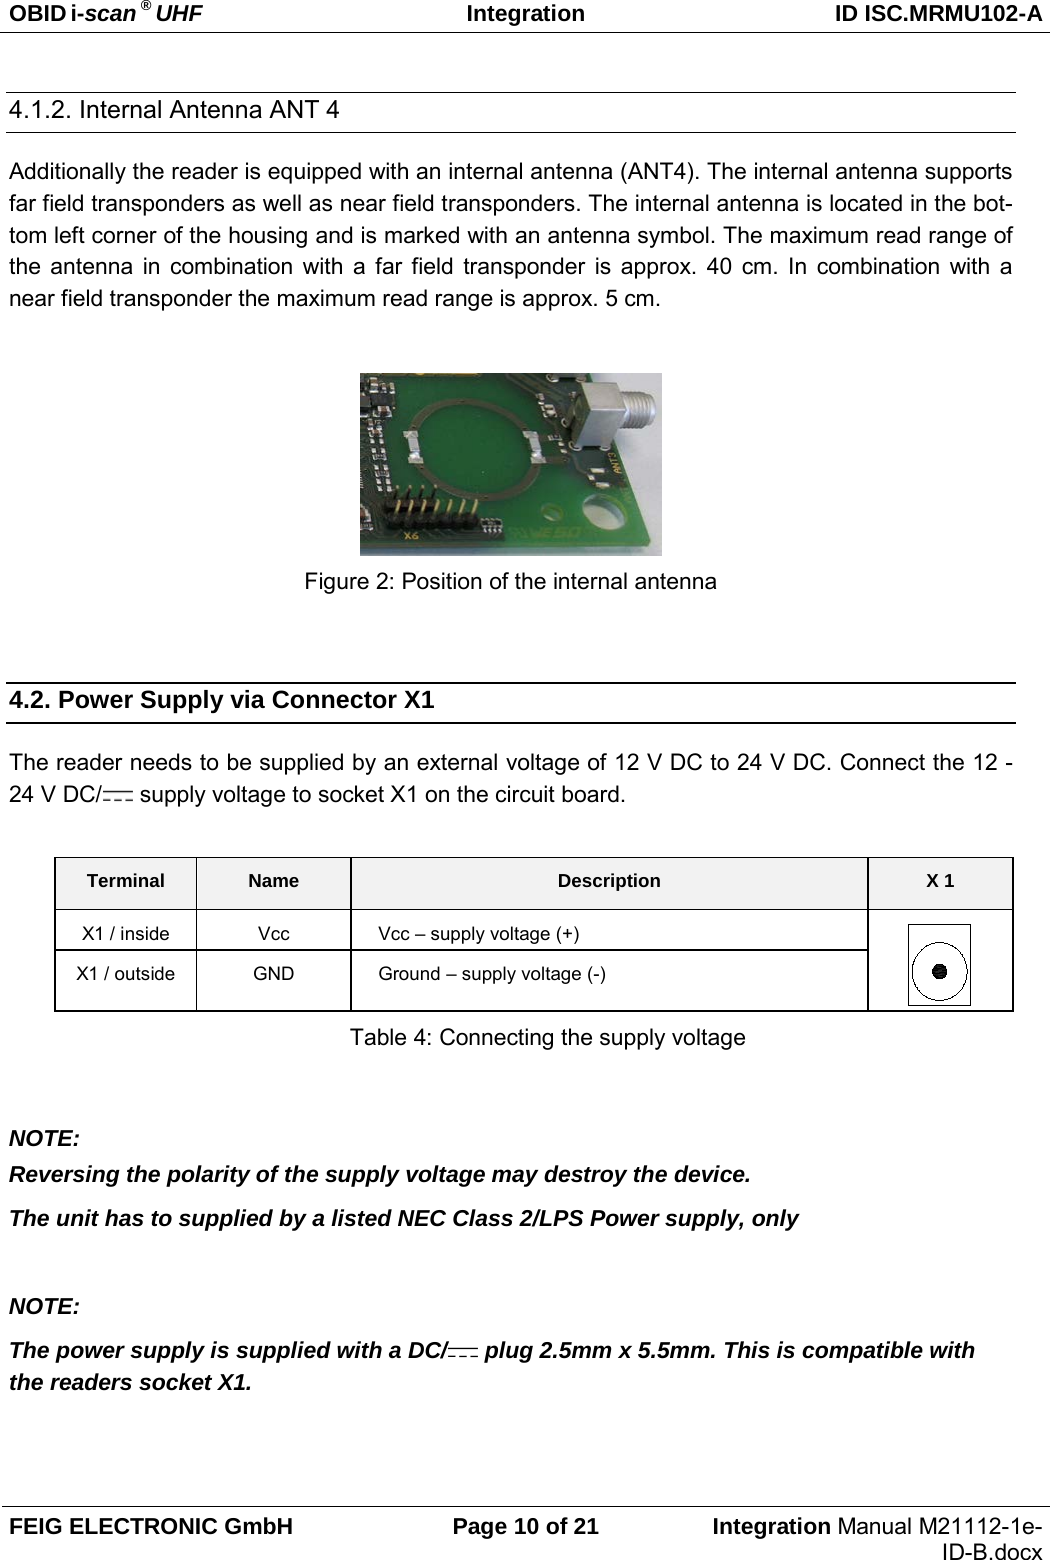 OBID i-scan ® UHF Integration ID ISC.MRMU102-A  FEIG ELECTRONIC GmbH Page 10 of 21 Integration Manual M21112-1e-ID-B.docx  4.1.2. Internal Antenna ANT 4 Additionally the reader is equipped with an internal antenna (ANT4). The internal antenna supports far field transponders as well as near field transponders. The internal antenna is located in the bot-tom left corner of the housing and is marked with an antenna symbol. The maximum read range of the antenna in combination with a far field transponder is approx. 40 cm. In combination with a near field transponder the maximum read range is approx. 5 cm.   Figure 2: Position of the internal antenna  4.2. Power Supply via Connector X1 The reader needs to be supplied by an external voltage of 12 V DC to 24 V DC. Connect the 12 - 24 V DC/  supply voltage to socket X1 on the circuit board.  Terminal Name Description X 1 X1 / inside  Vcc  Vcc – supply voltage (+)  X1 / outside GND Ground – supply voltage (-) Table 4: Connecting the supply voltage  NOTE: Reversing the polarity of the supply voltage may destroy the device. The unit has to supplied by a listed NEC Class 2/LPS Power supply, only  NOTE: The power supply is supplied with a DC/  plug 2.5mm x 5.5mm. This is compatible with the readers socket X1.  